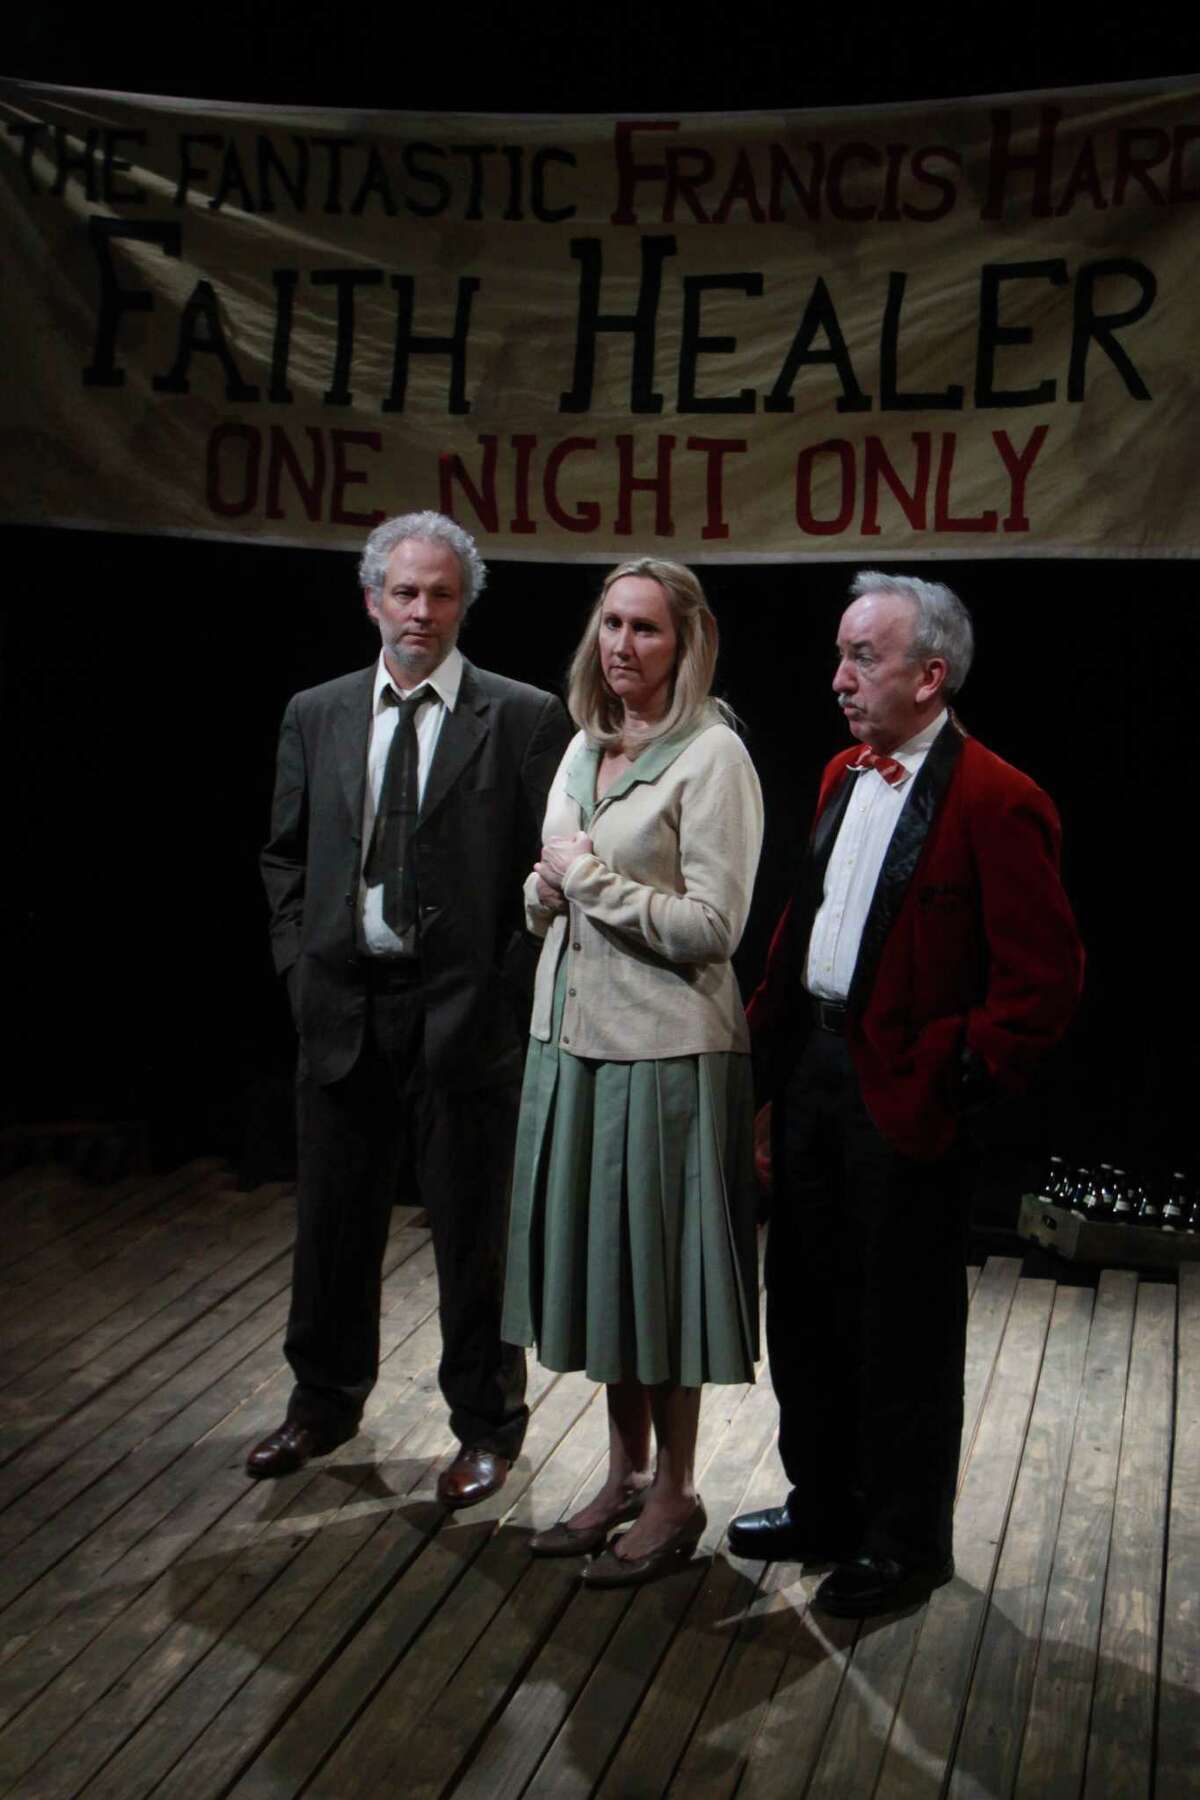 (For the Chronicle/Gary Fountain, January 19, 2014) "Faith Healer" was a highlight of Stark Naked Theatre's last season; shown (from left) are stars Philip Lehl, Kim Tobin-Lehl and John Tyson. The company will be promoting its 2014-15 season as part of Spring Street Studio's open house this week.